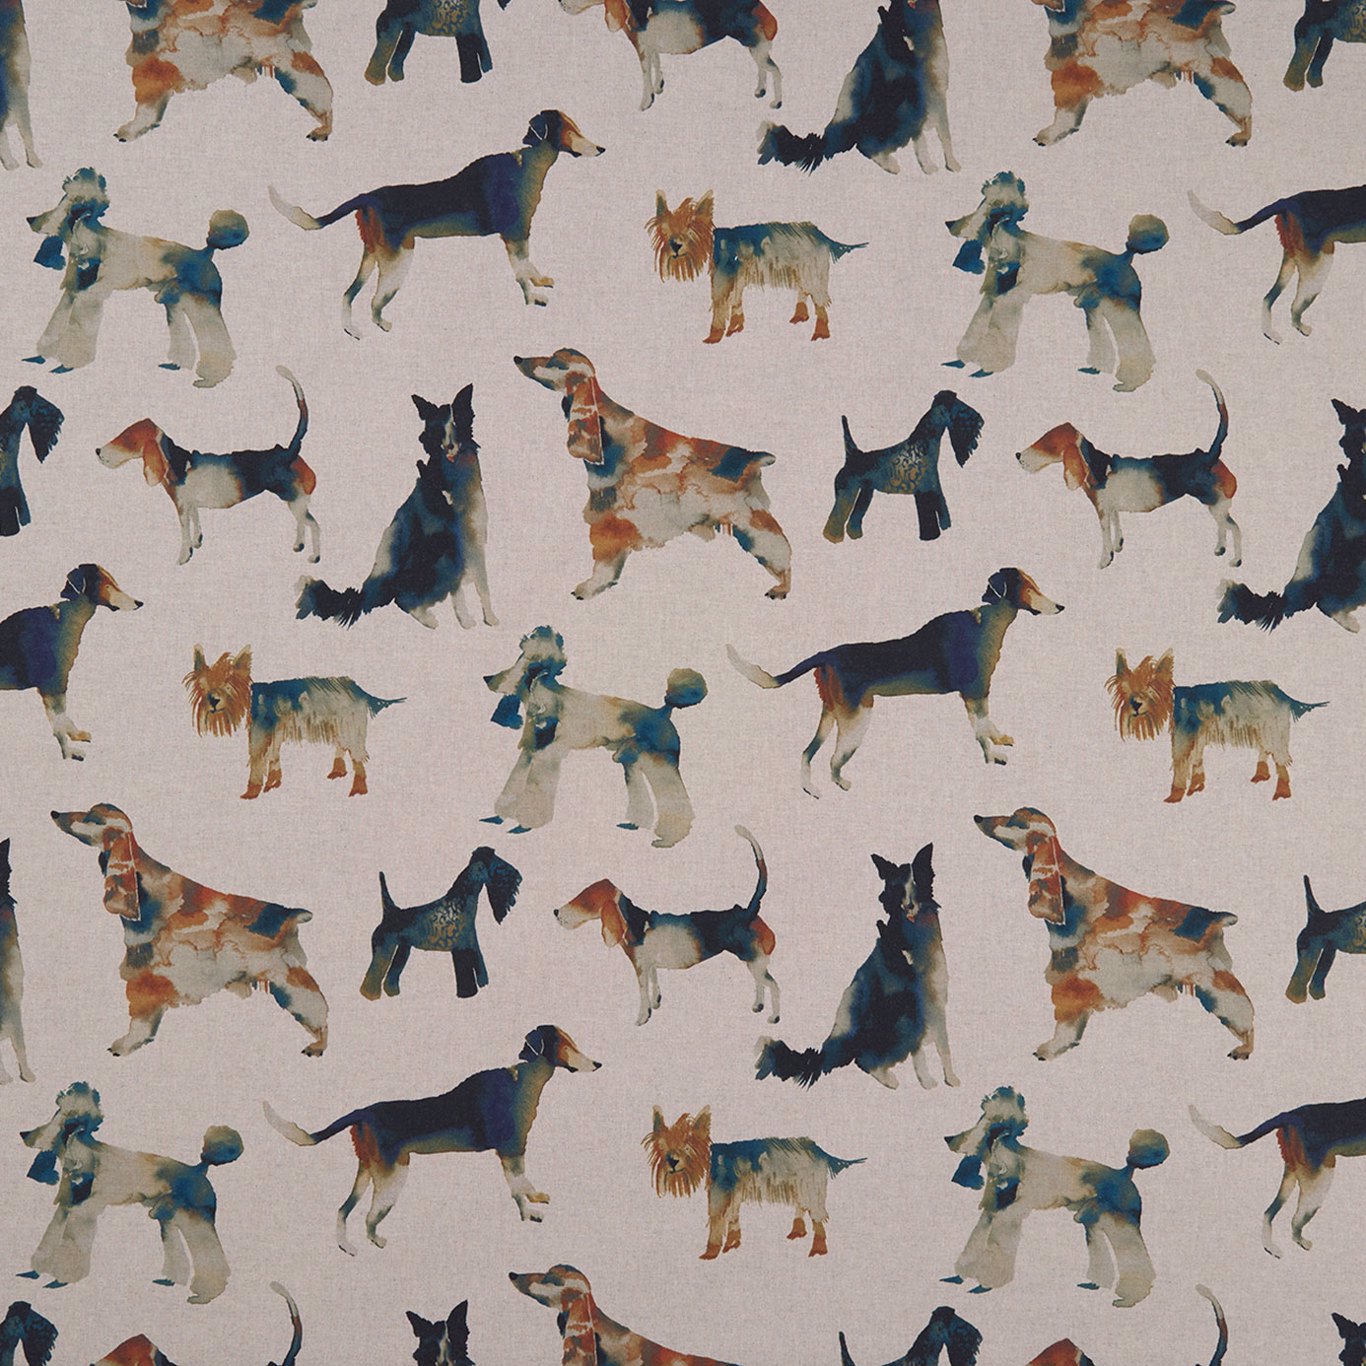 Walkies Linen Fabric by CNC